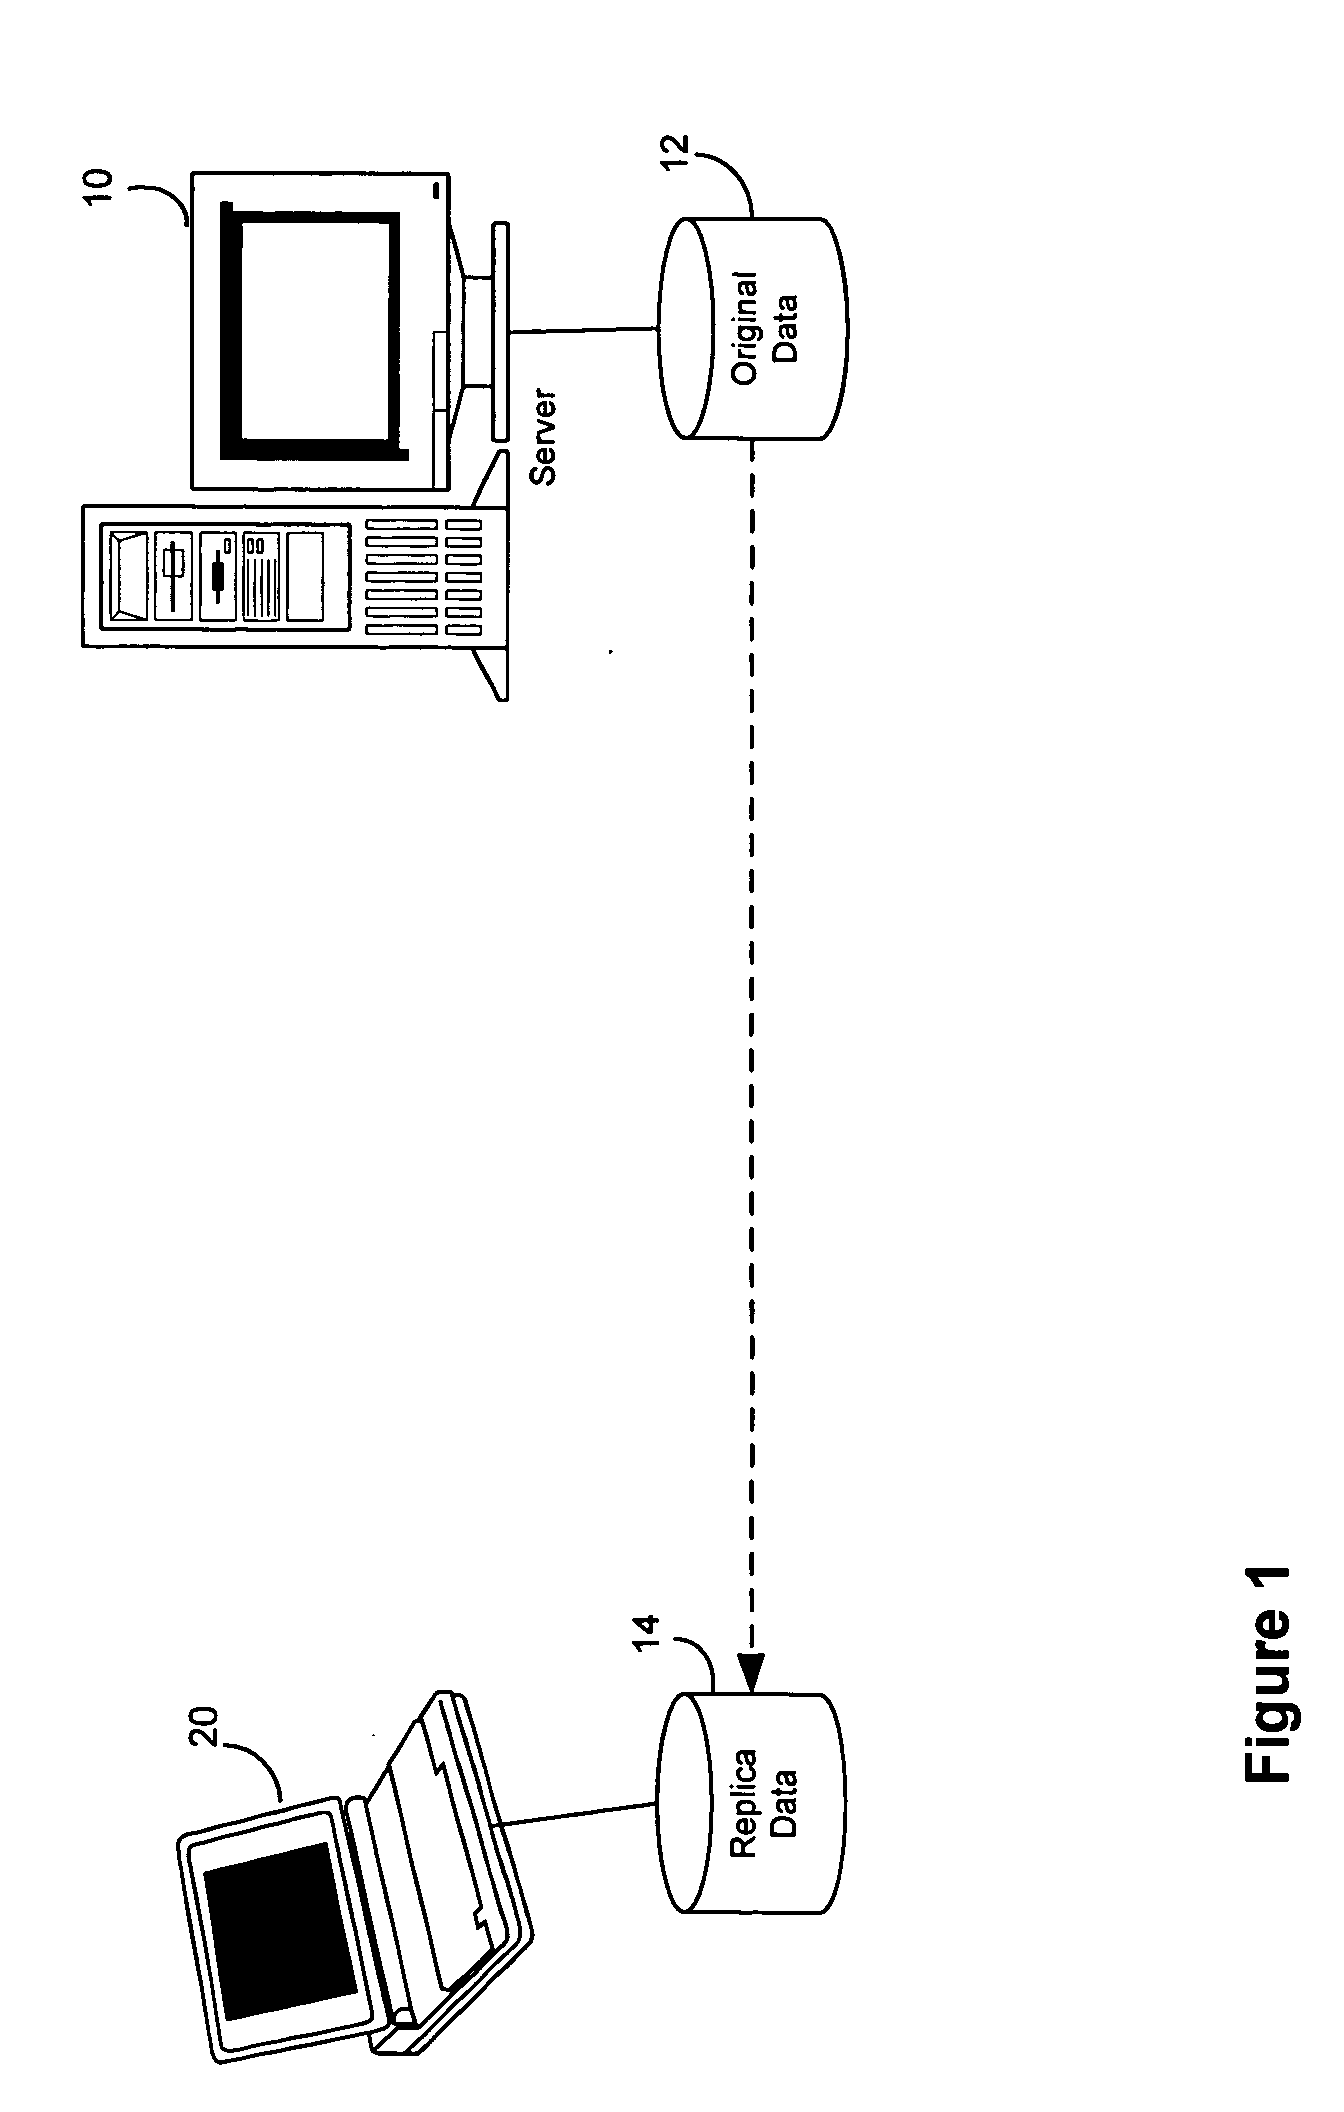 System and method for replicating data in a distributed system